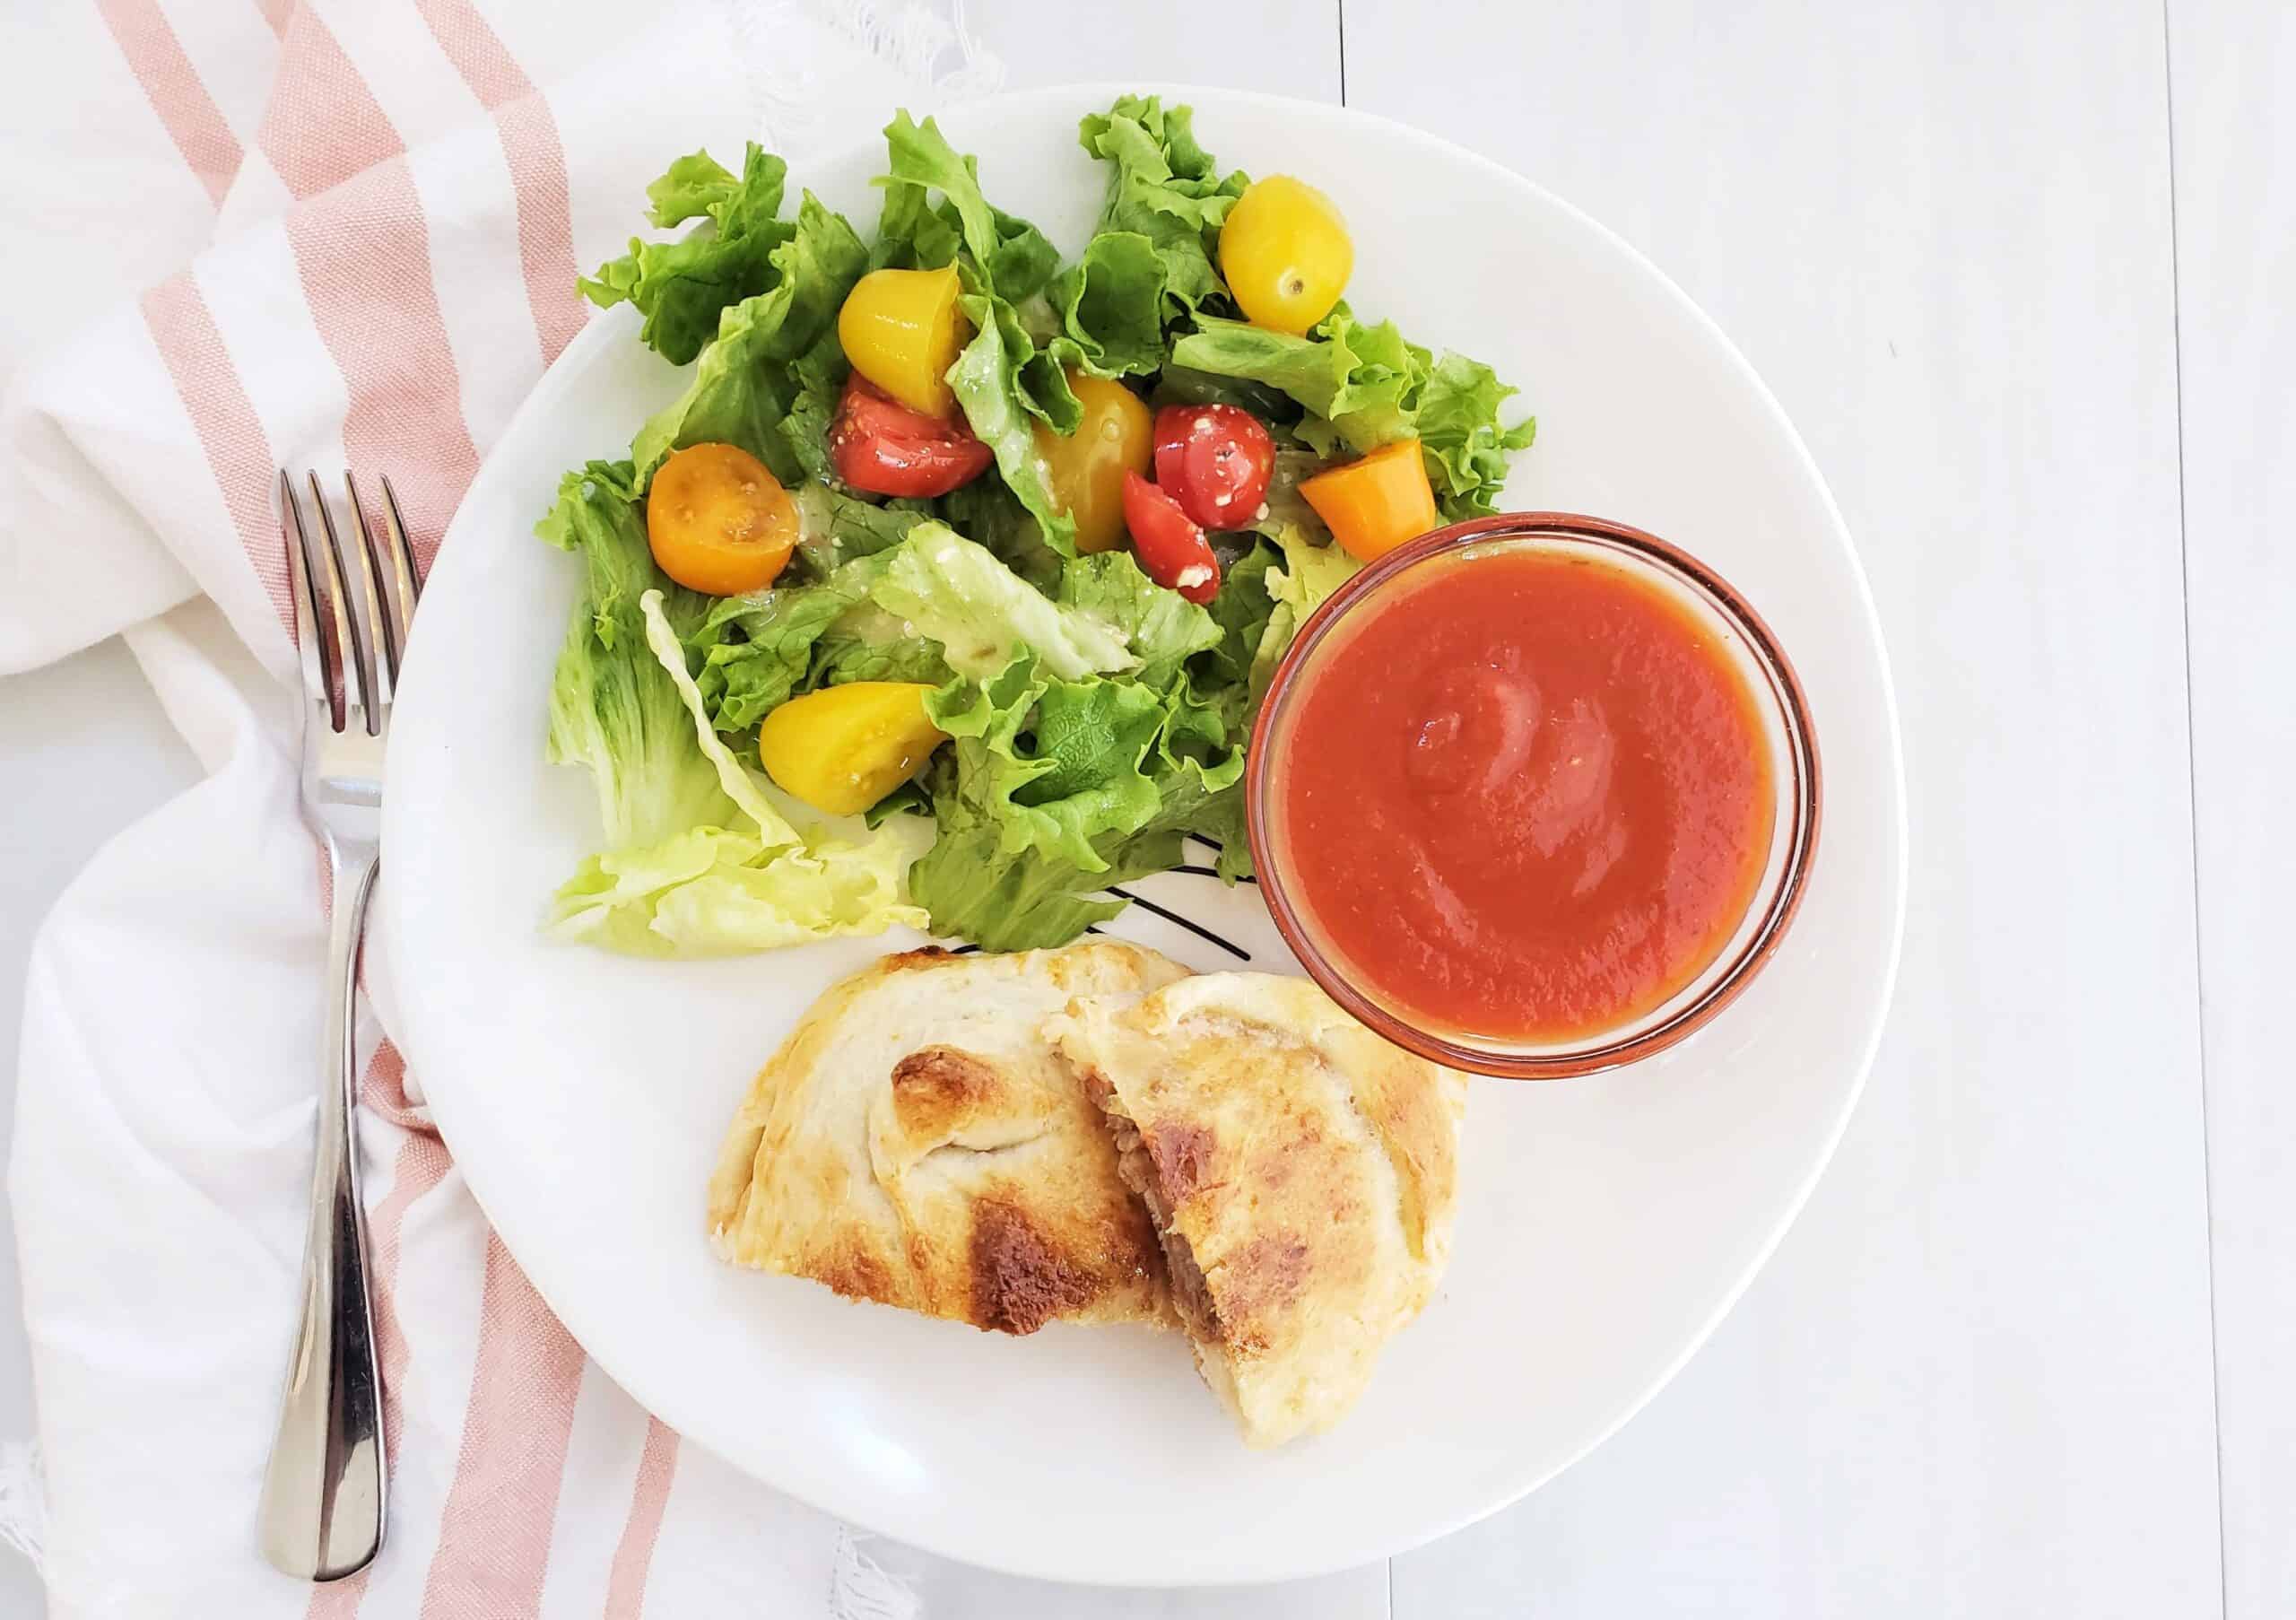 Pizza pockets with dipping sauce and salad on the side.